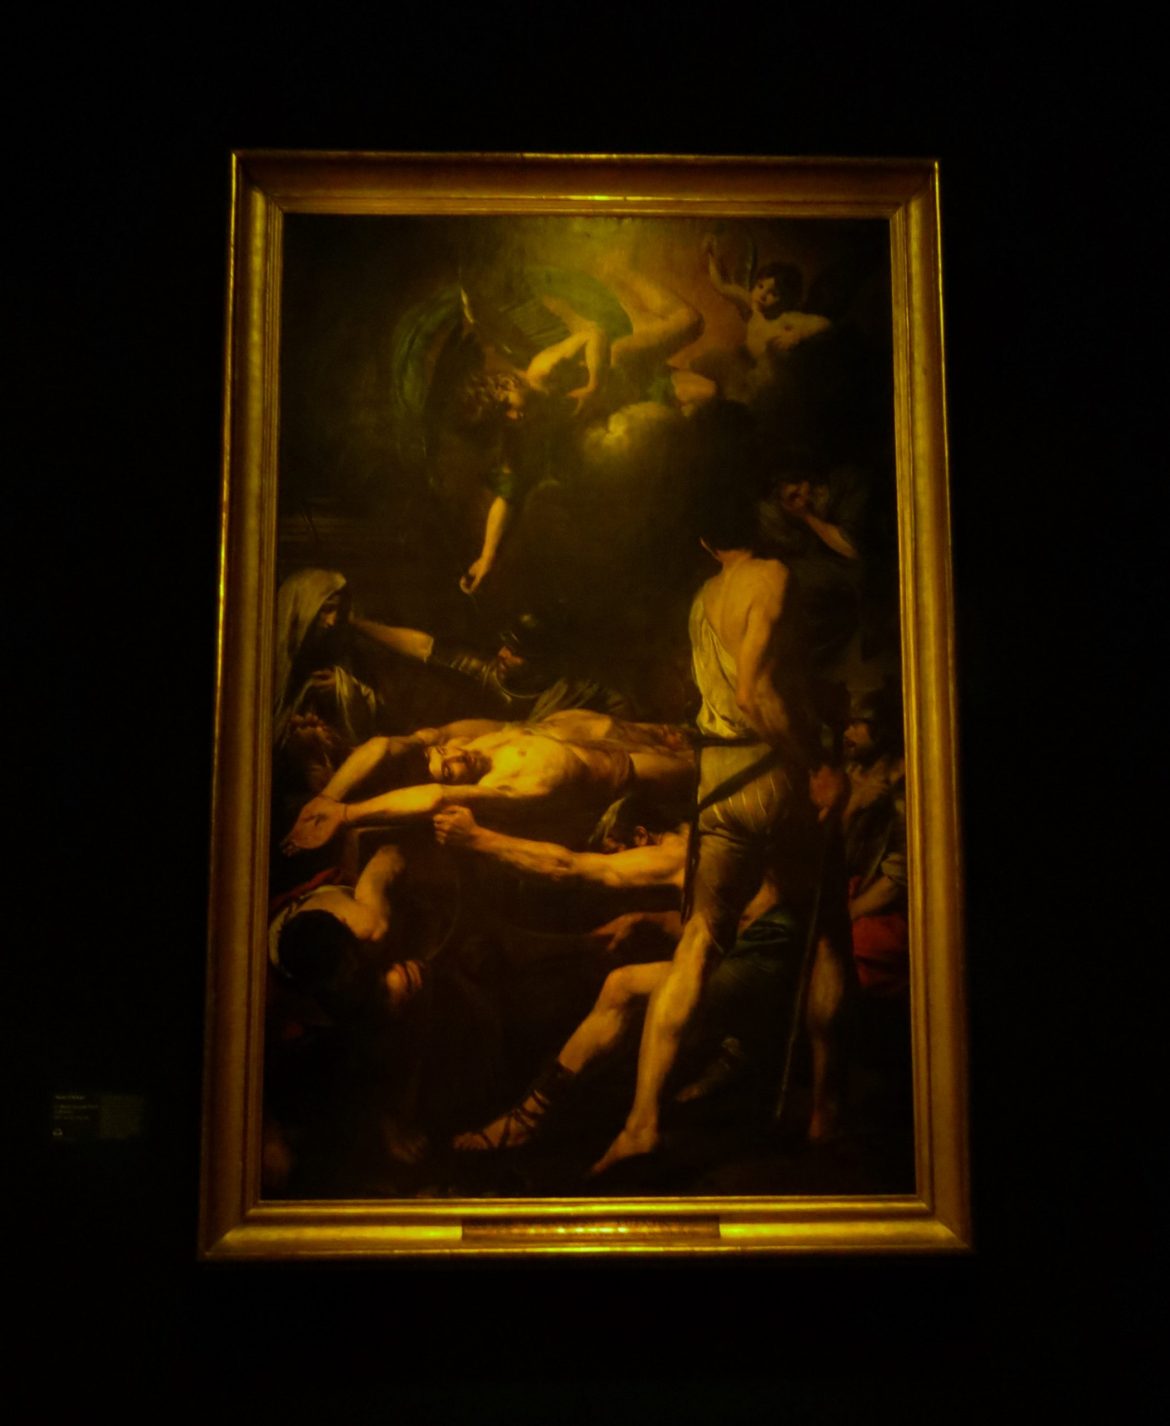 Martyrdom of Saints Processus and Martinian, oil on canvas, 302 x 192cm, 1629-30